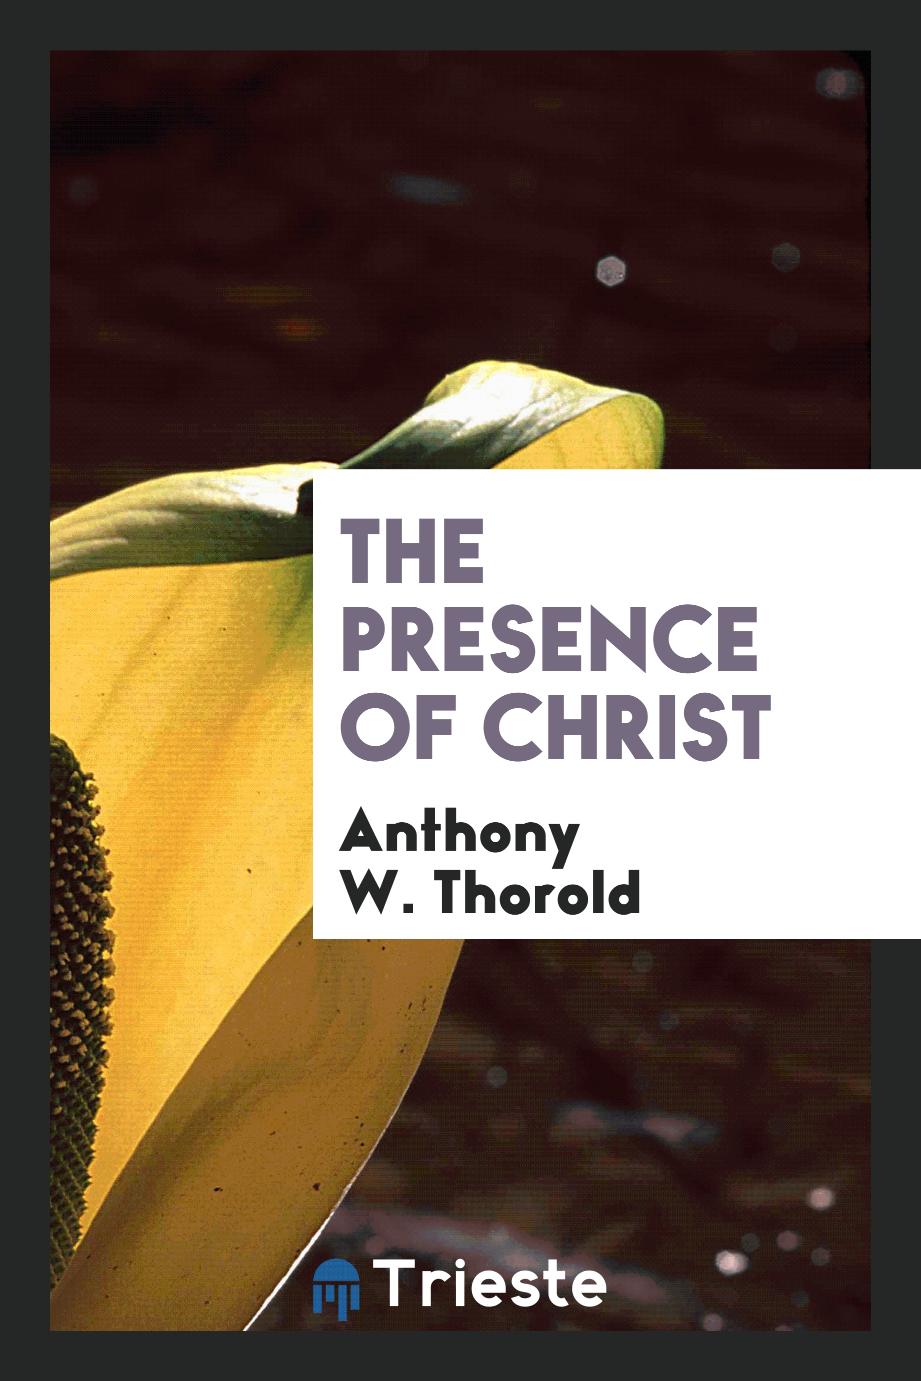 Anthony W. Thorold - The presence of Christ